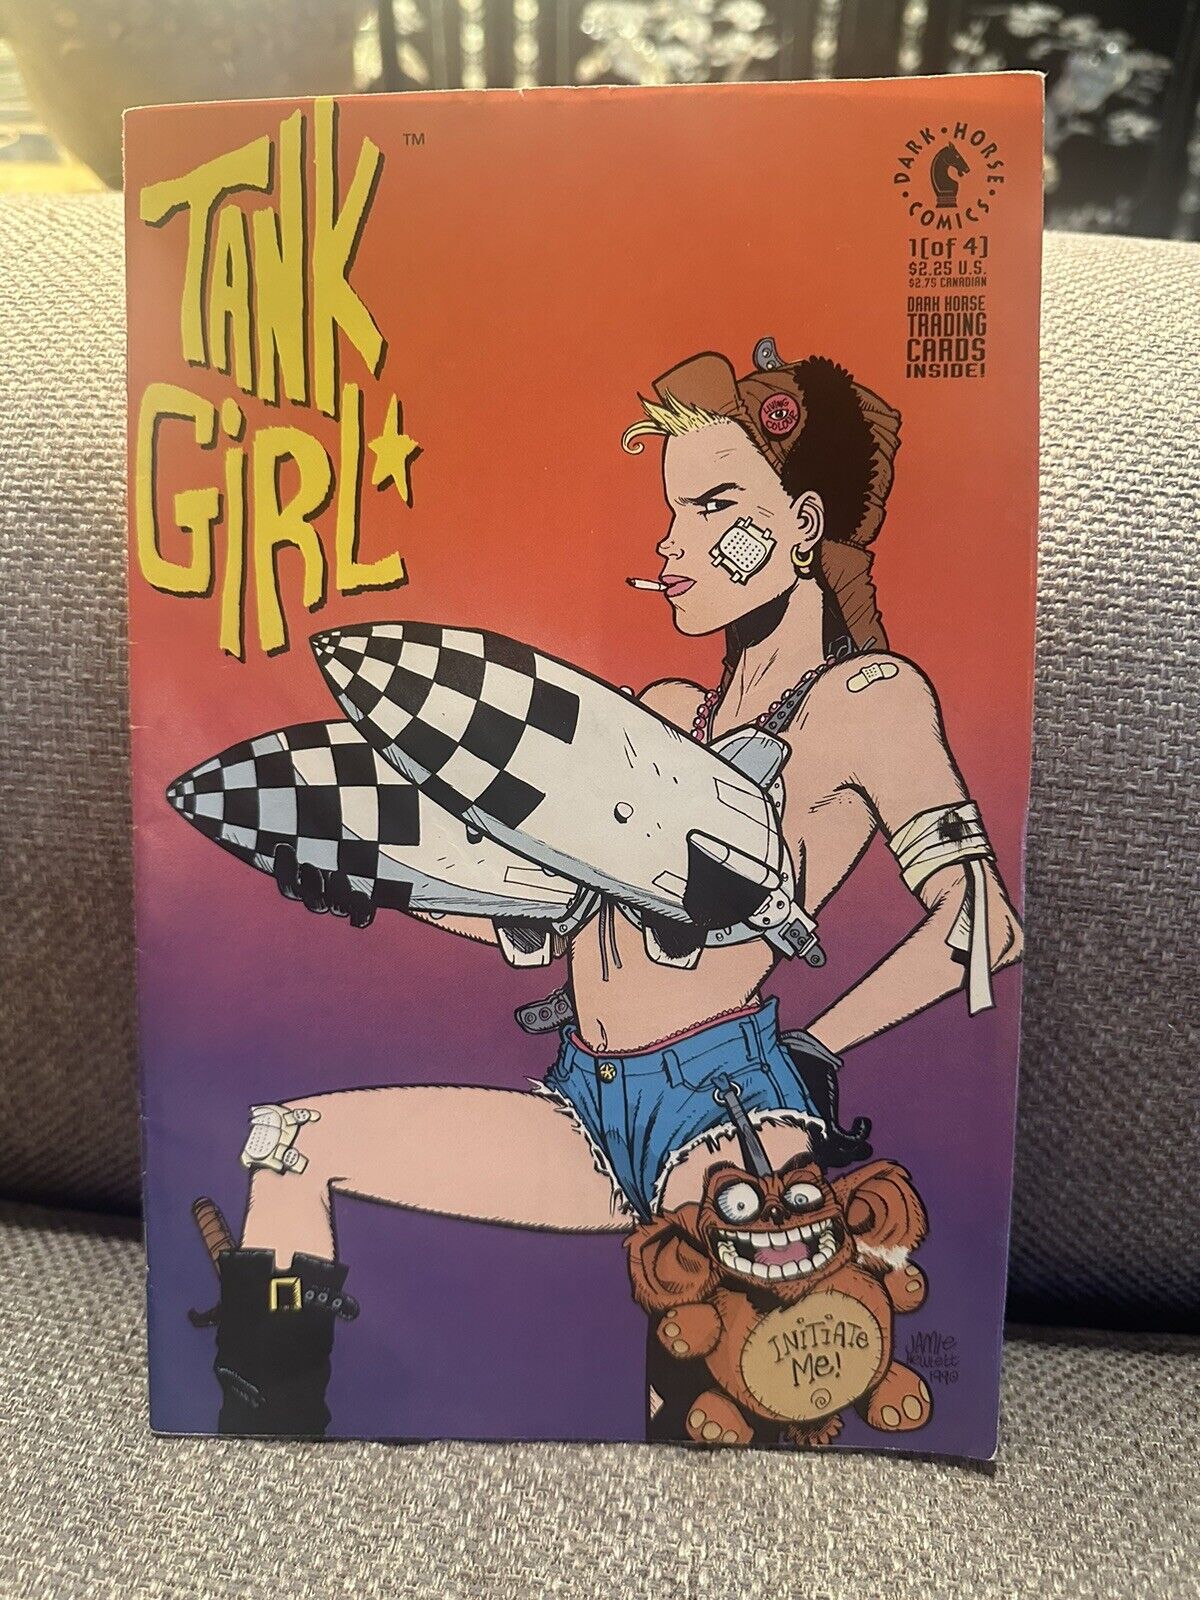 VINTAGE- RARE - Tank Girl #1 - 1991 1st Issue - Dark Horse - W/ Trading Cards